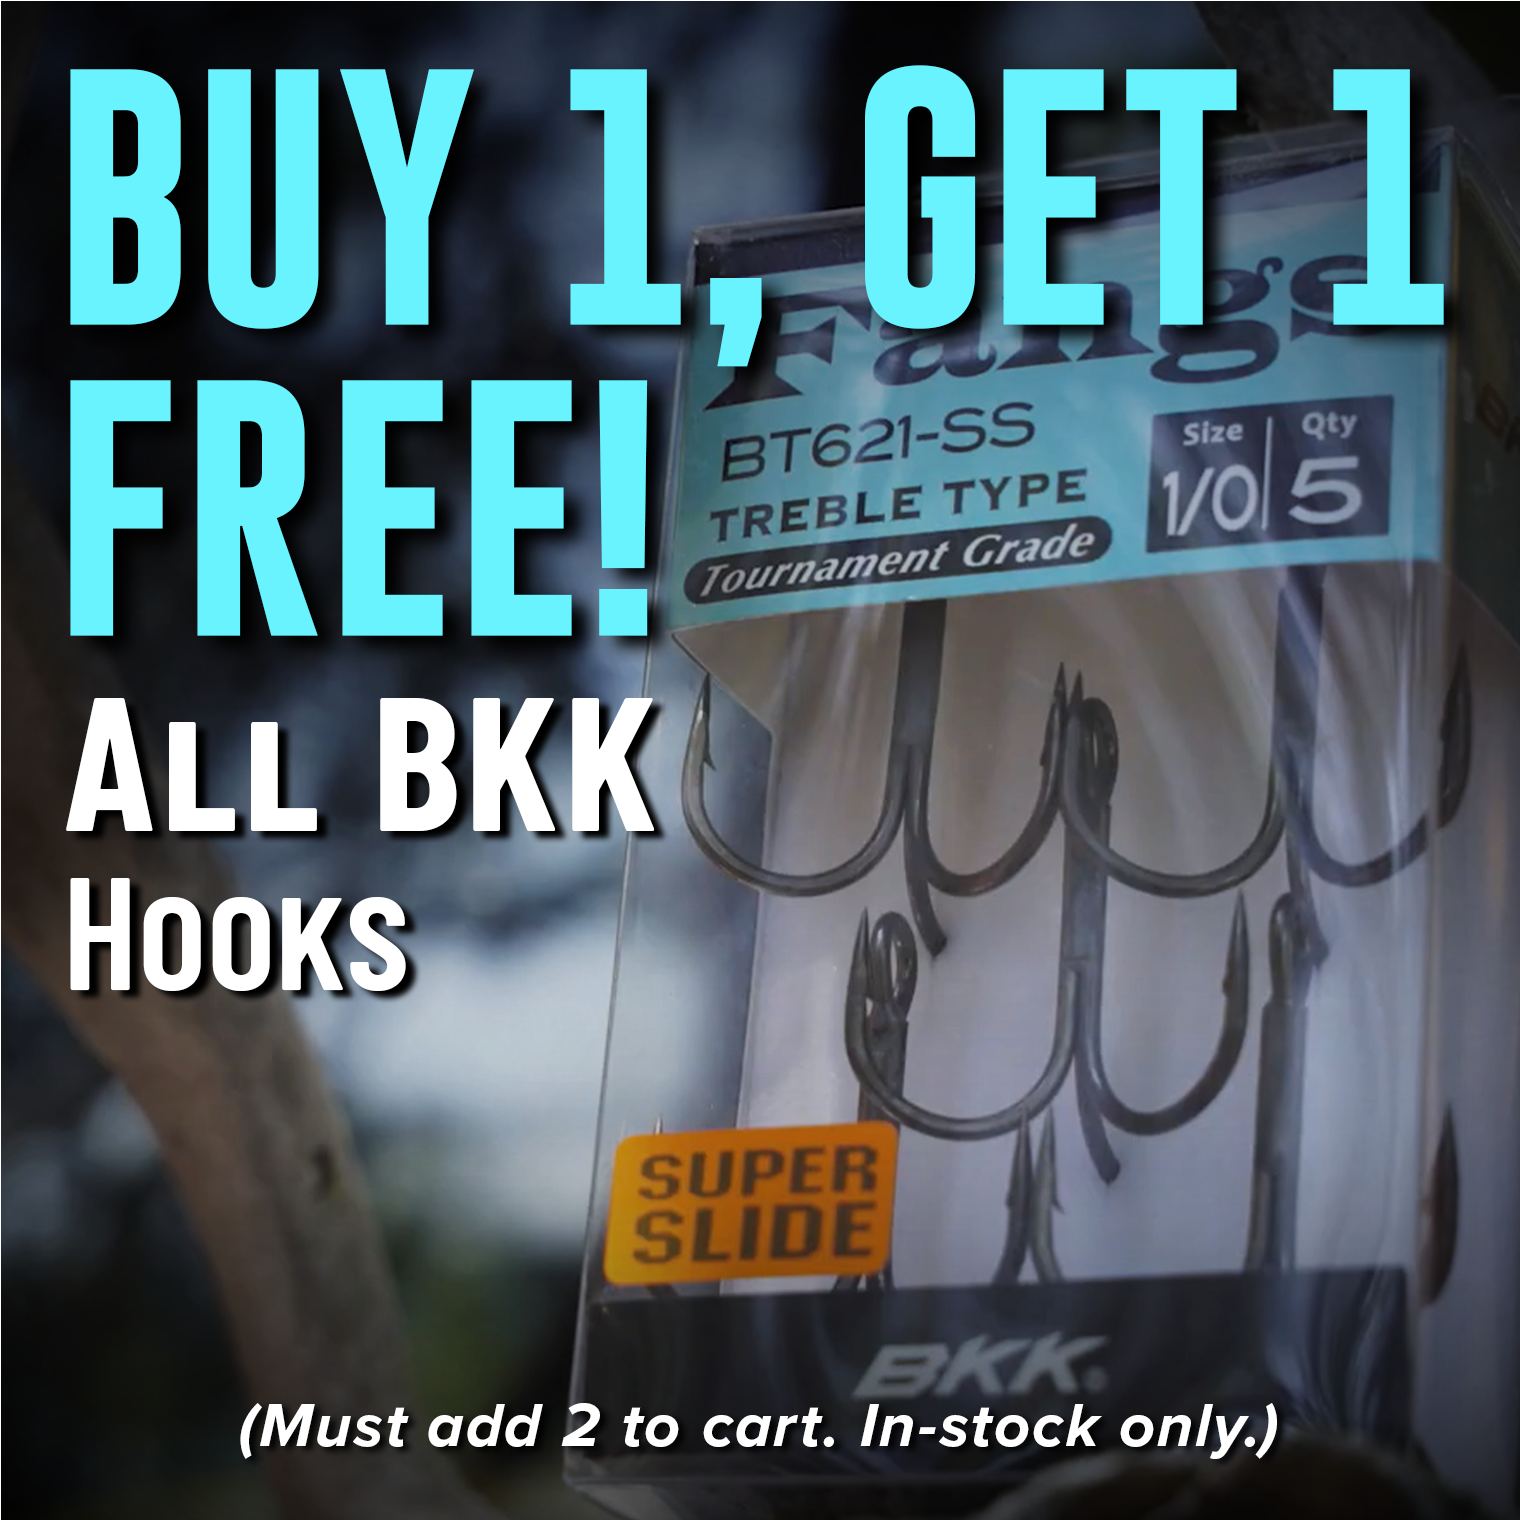 Buy 1, Get 1 Free! All BKK Hooks (Must add 2 to cart. In-stock only.)